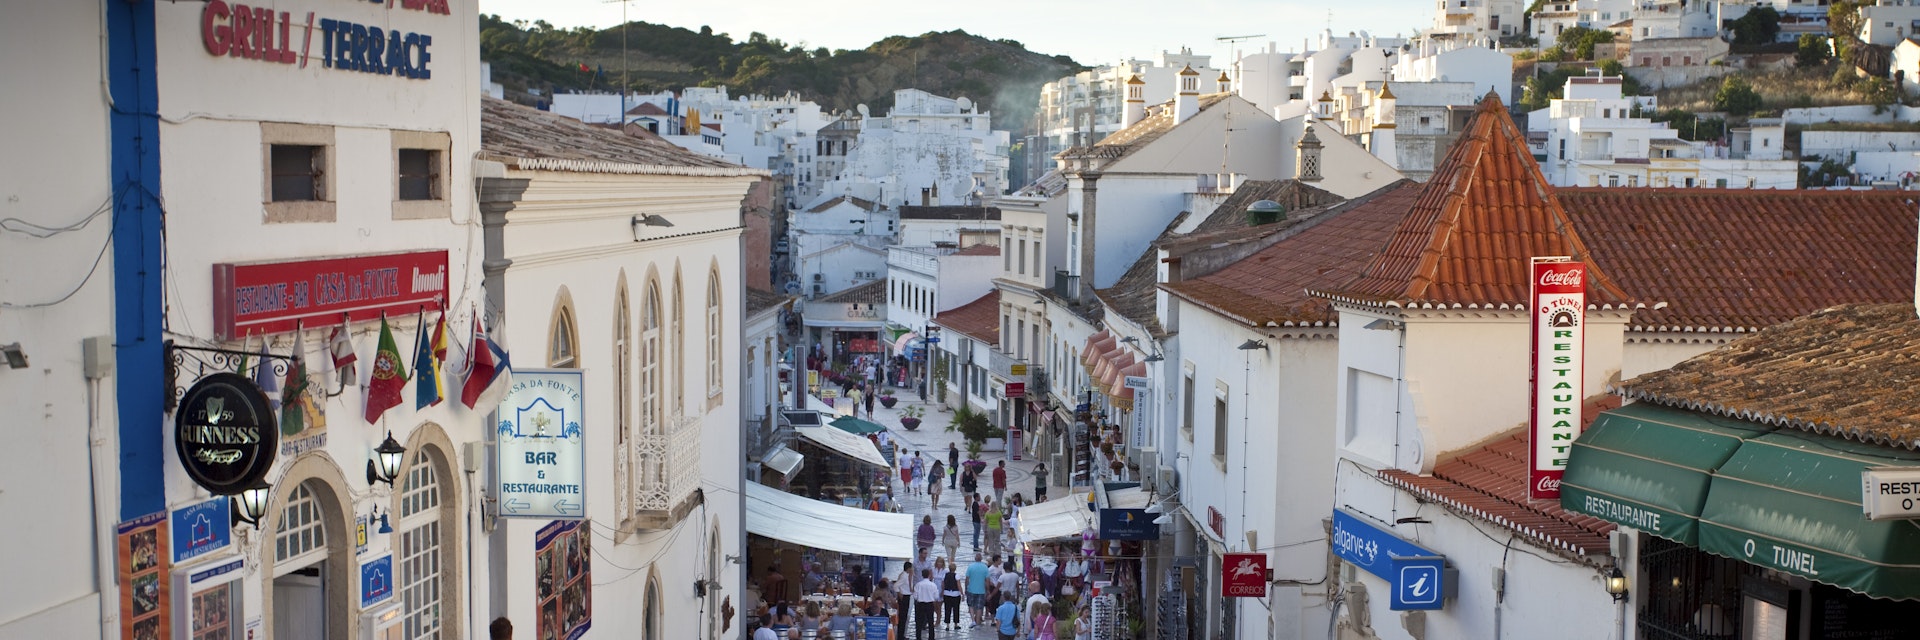 Portugal, Algarve, Albufeira, high angle view of crowded street